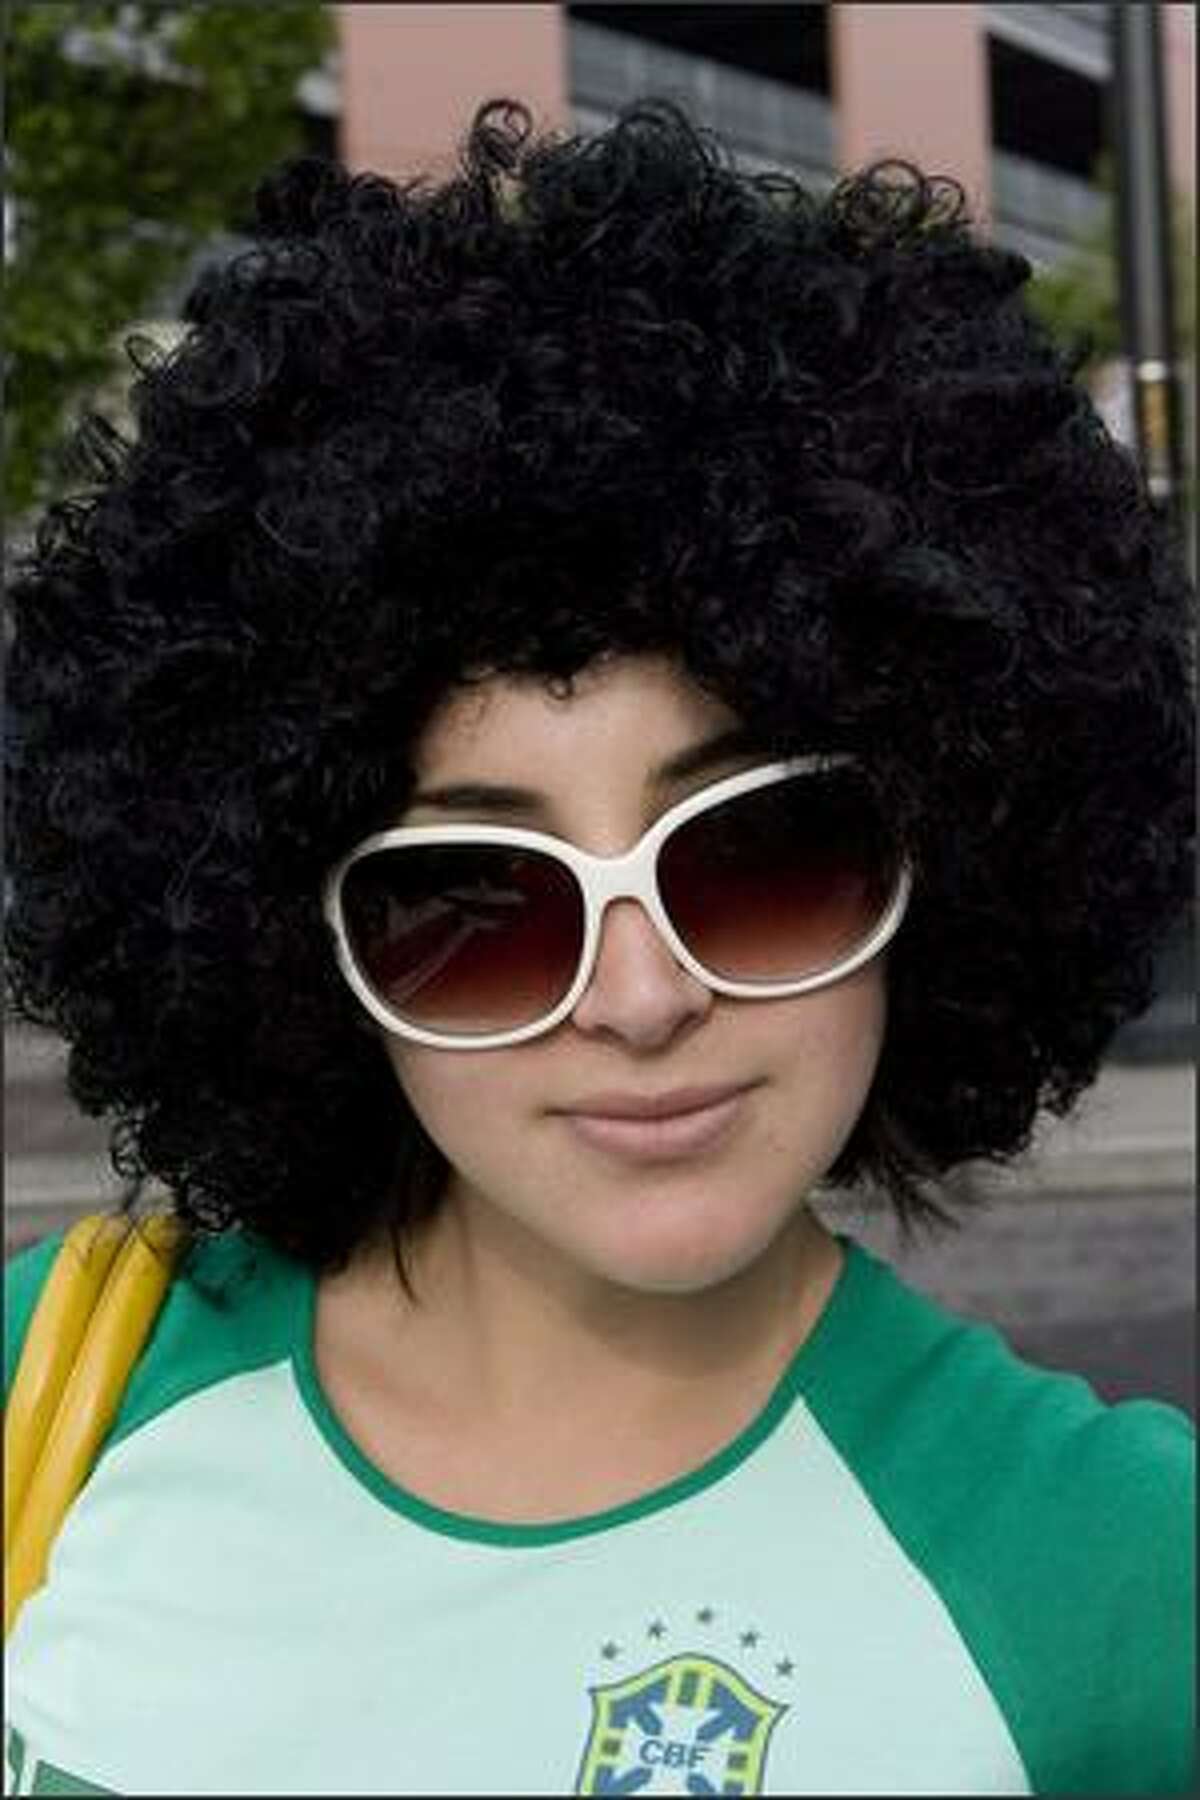 Kava fan Biri Moorehouse, of Silverdale, had her black wig on and was ready to cheer for Brazil.